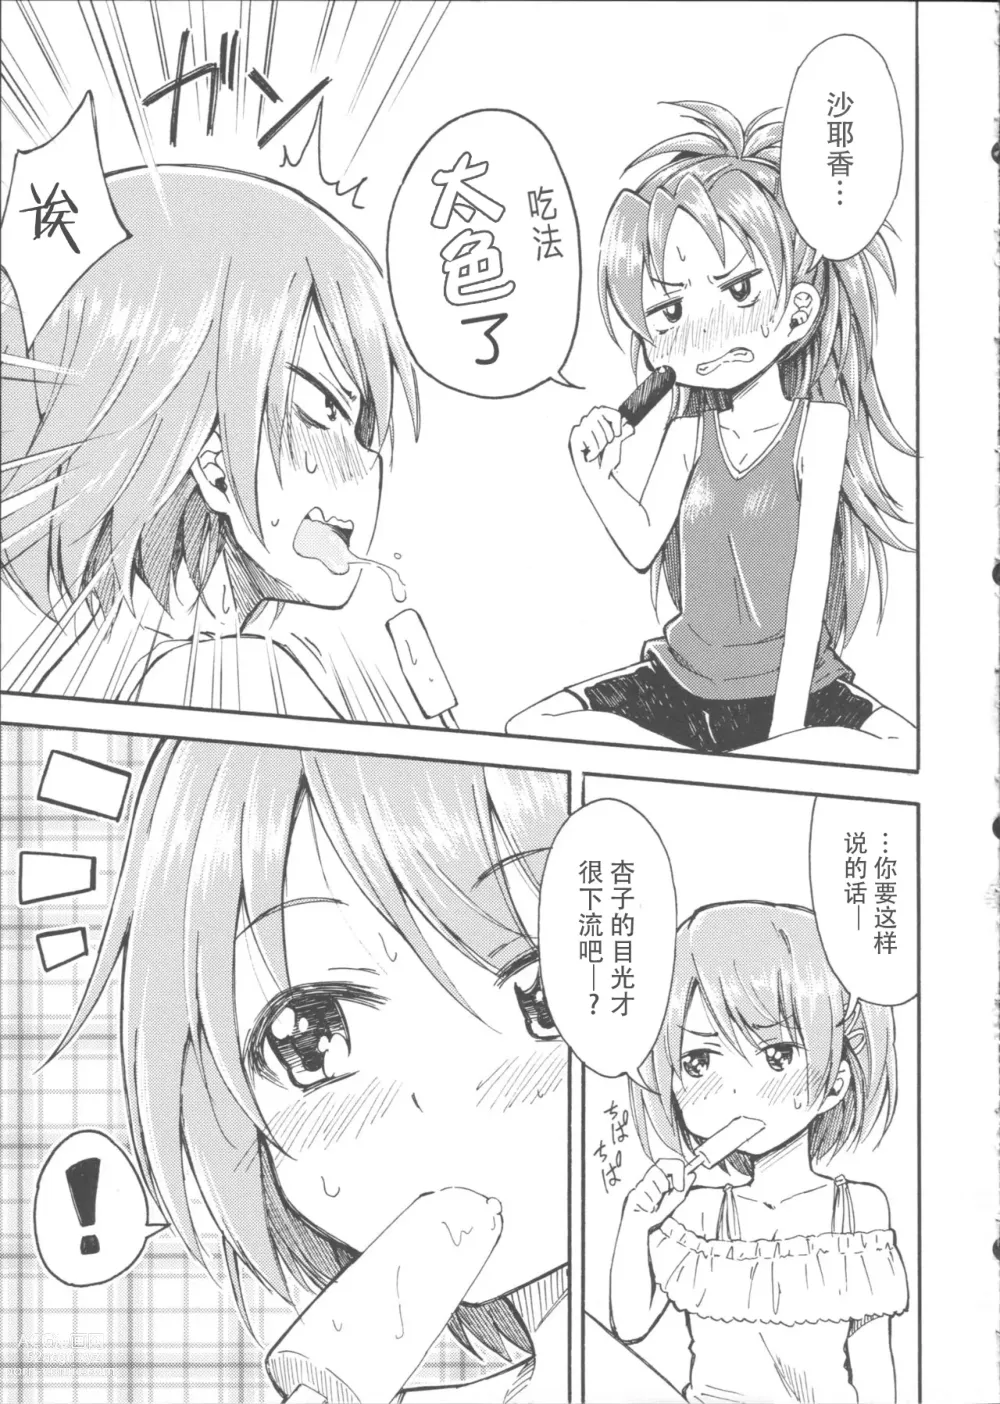 Page 7 of doujinshi Lovely Girls Lily vol. 9.5